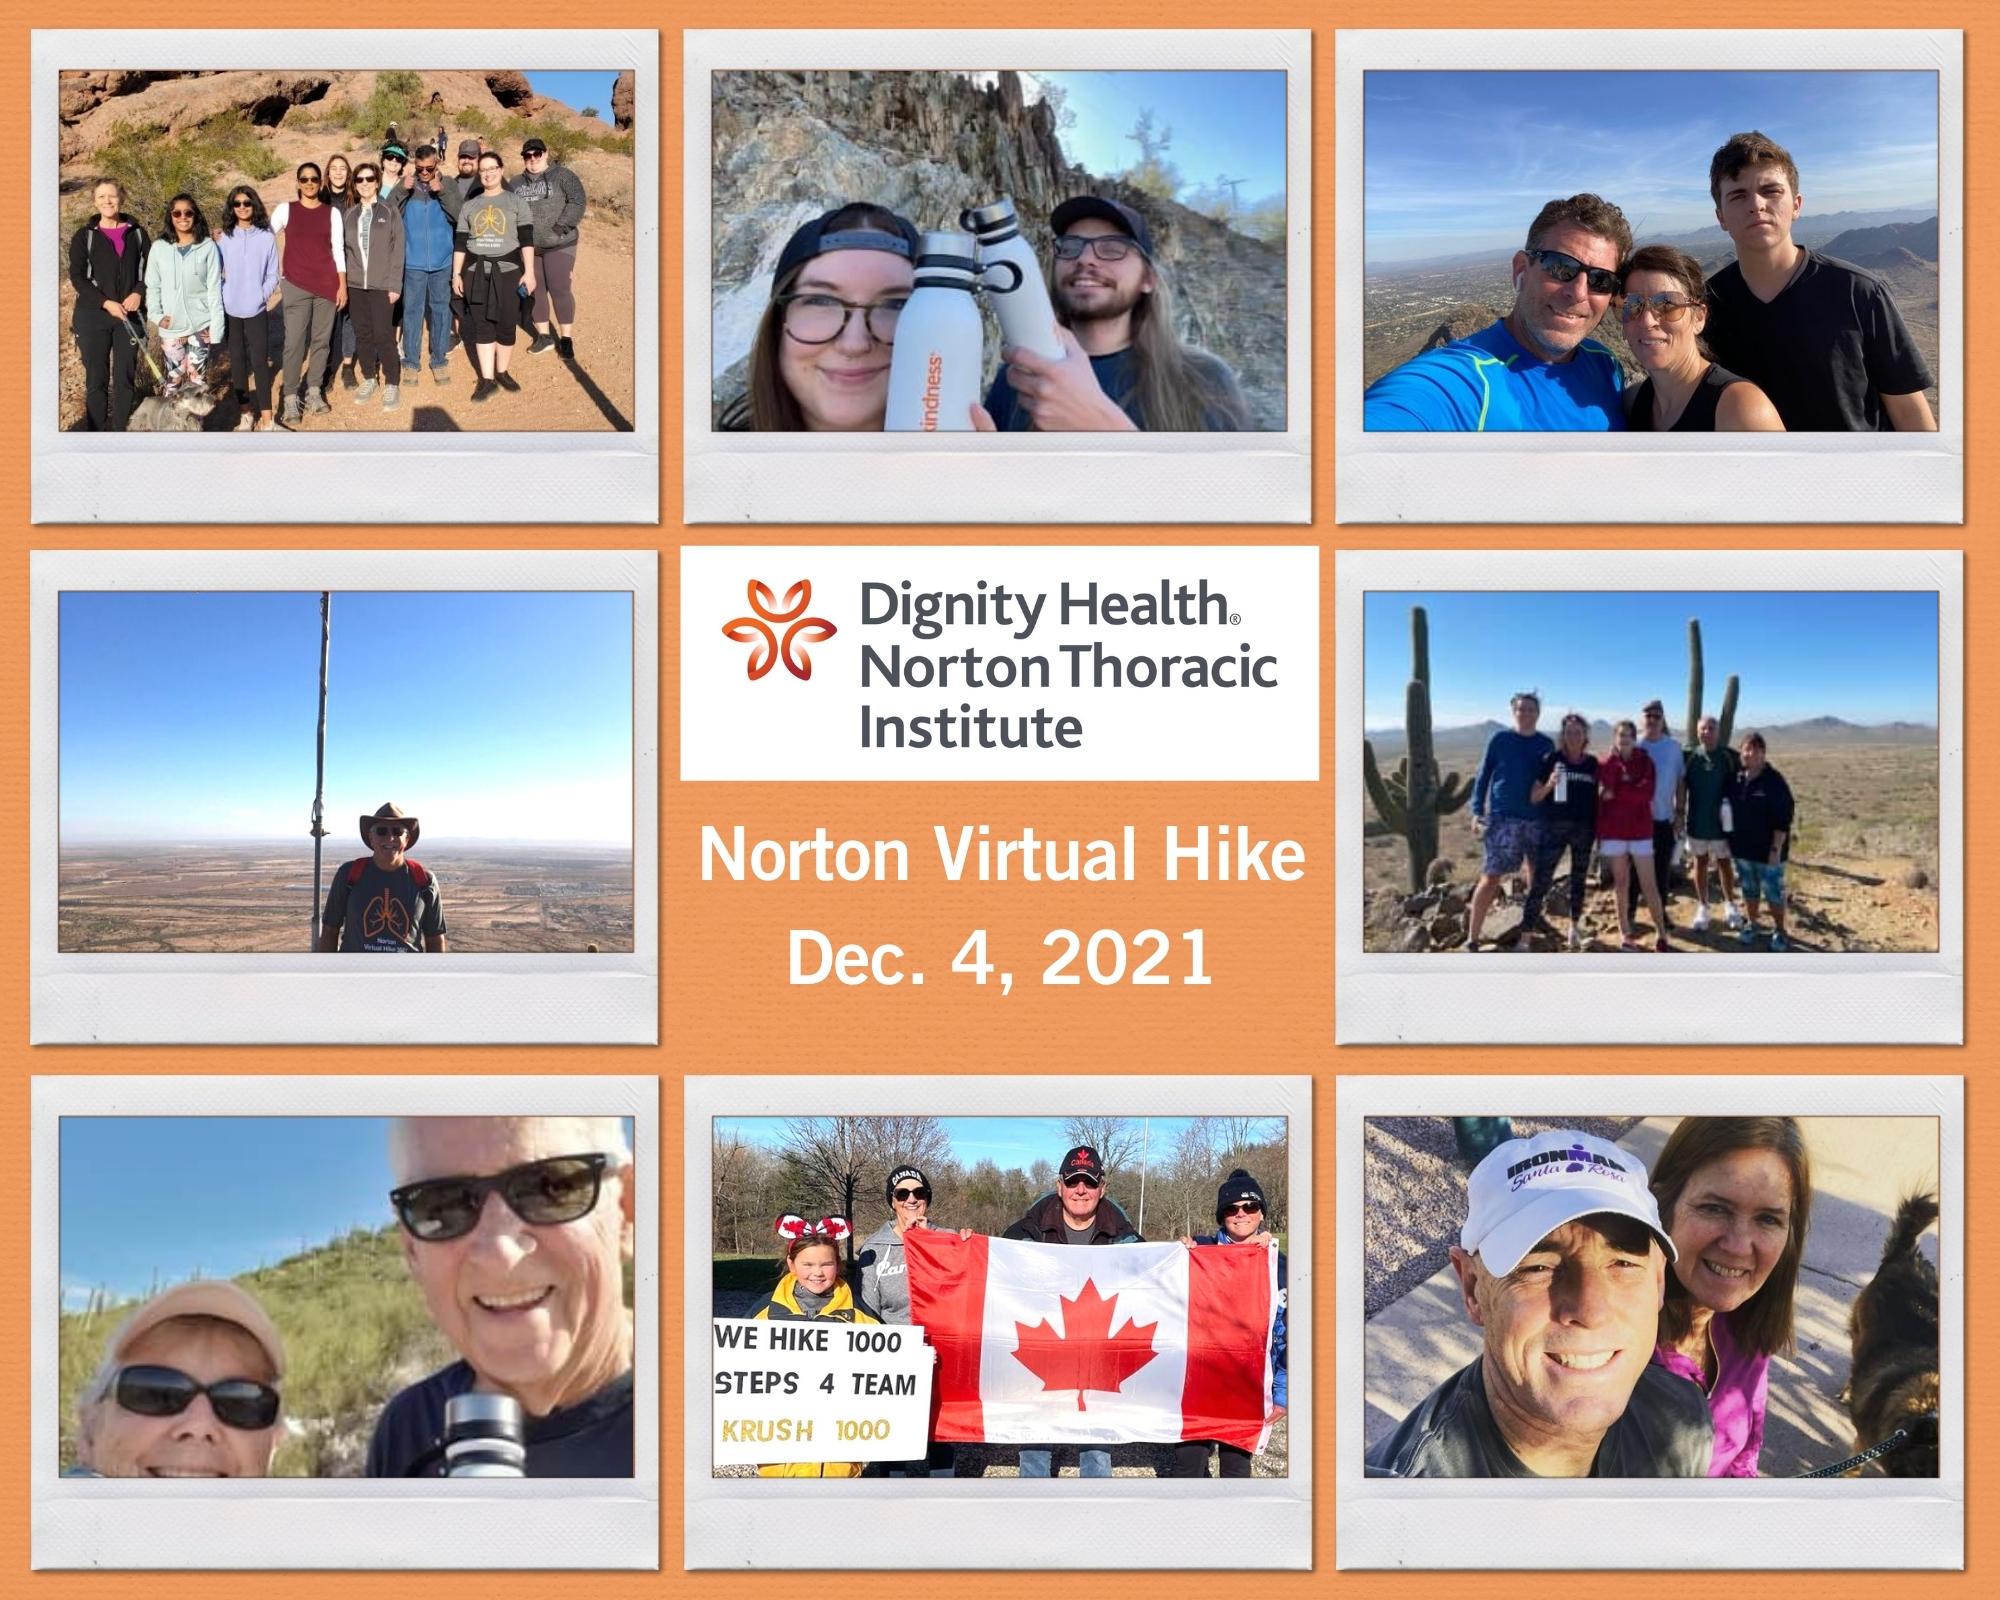 images of people who participated in Norton virtual hike